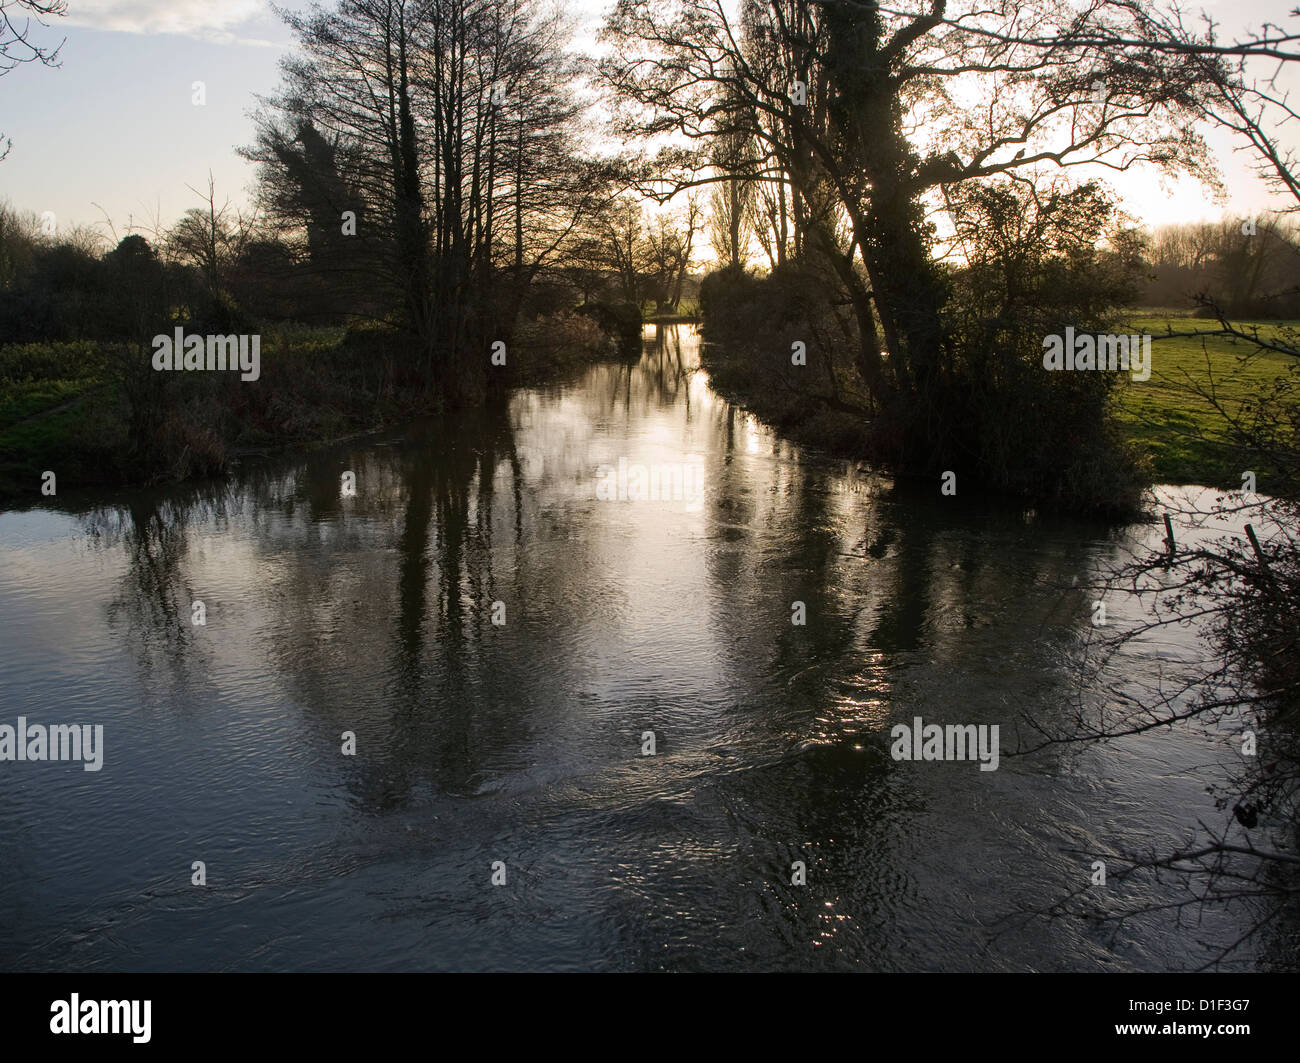 Winter landscape trees and water with low sun in sky River Deben, Ufford, Suffolk, England Stock Photo